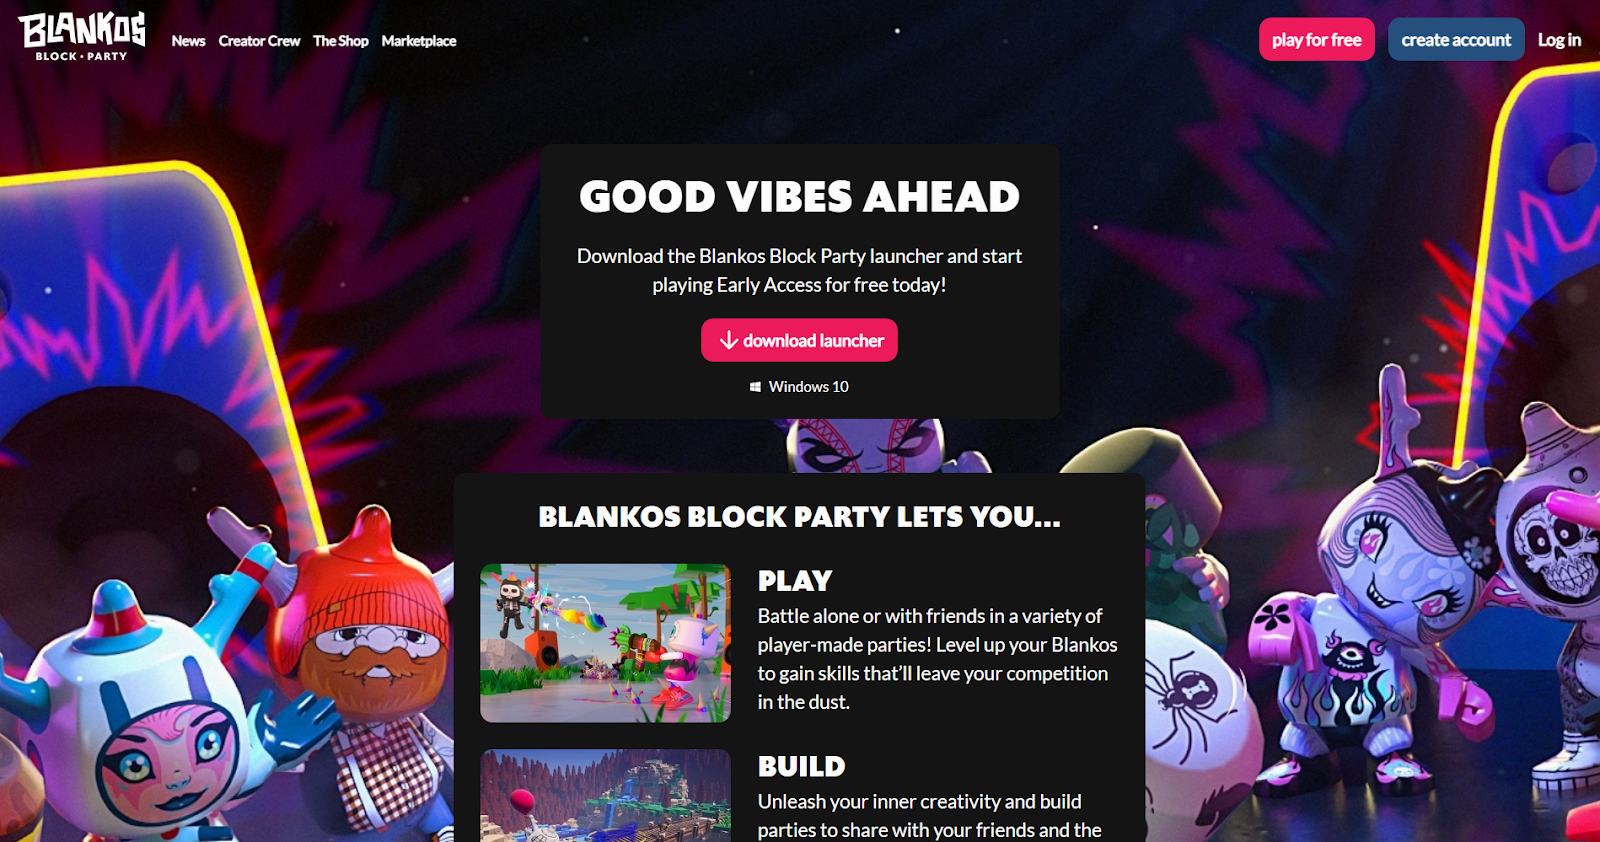 Photo for the Article - Blankos Block Party Philippines Beginners Guide